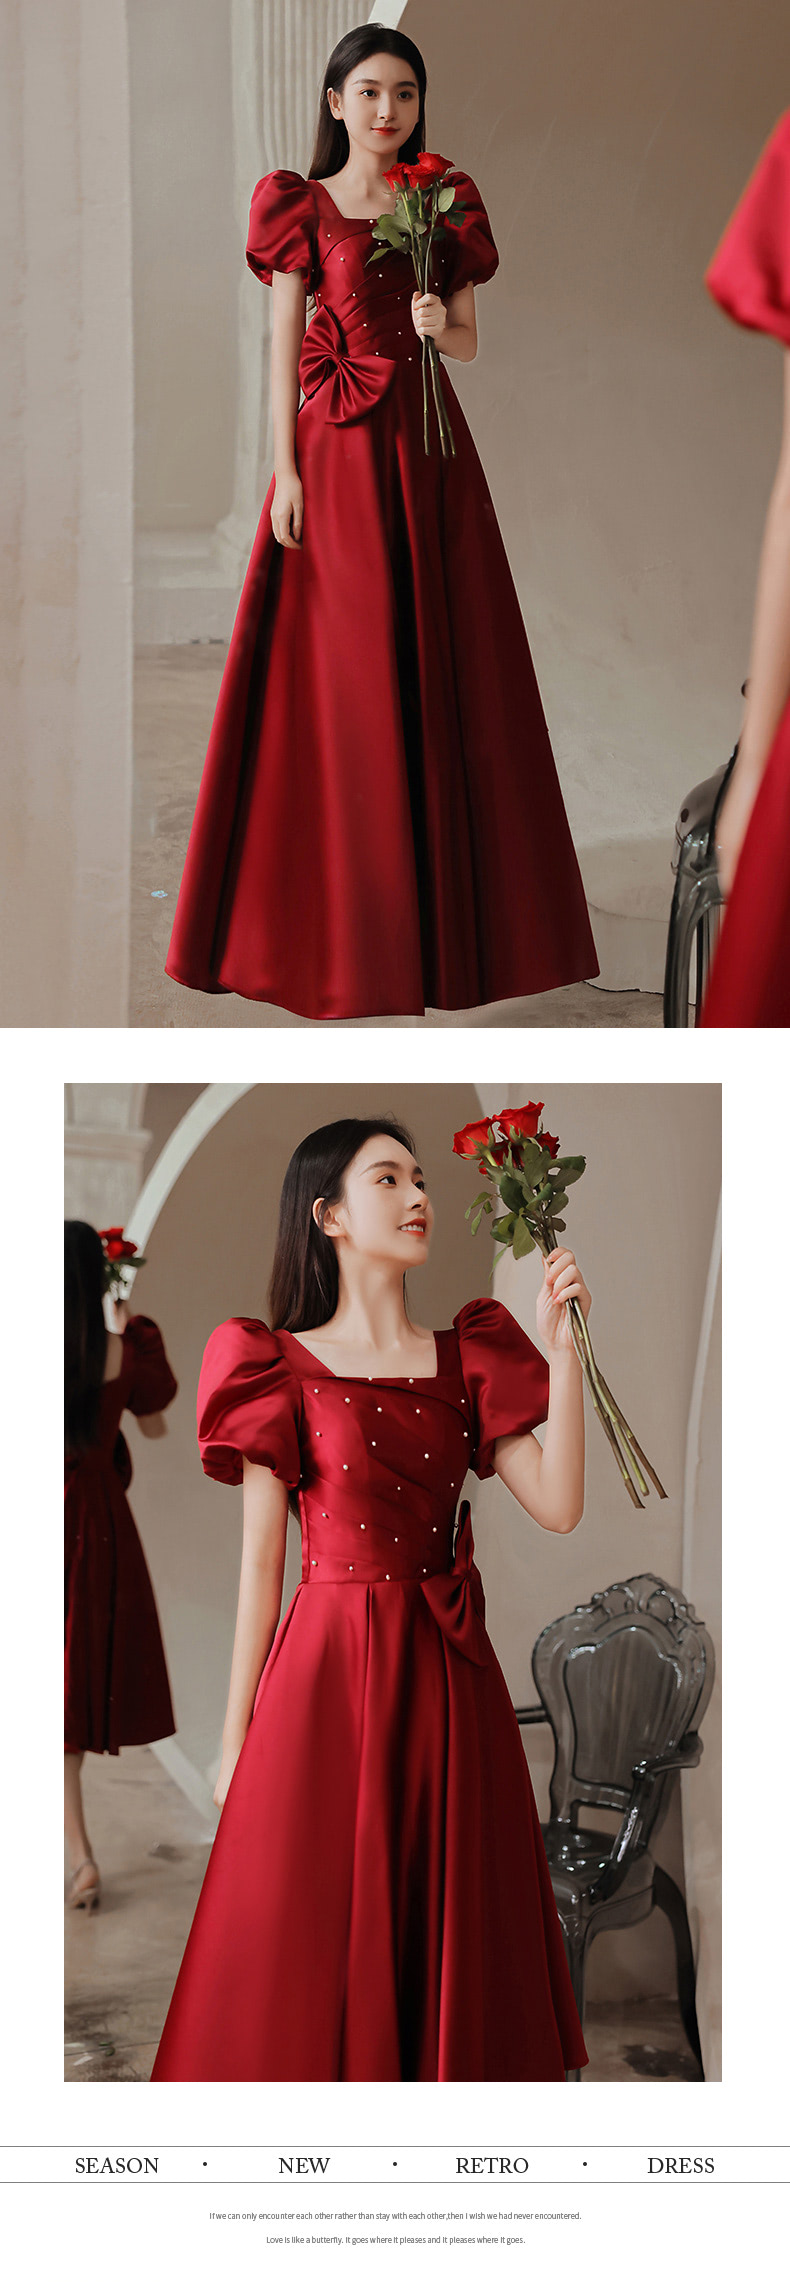 Sweet-Princess-Burgundy-Prom-Party-Formal-Dress-with-Bowknot13.jpg